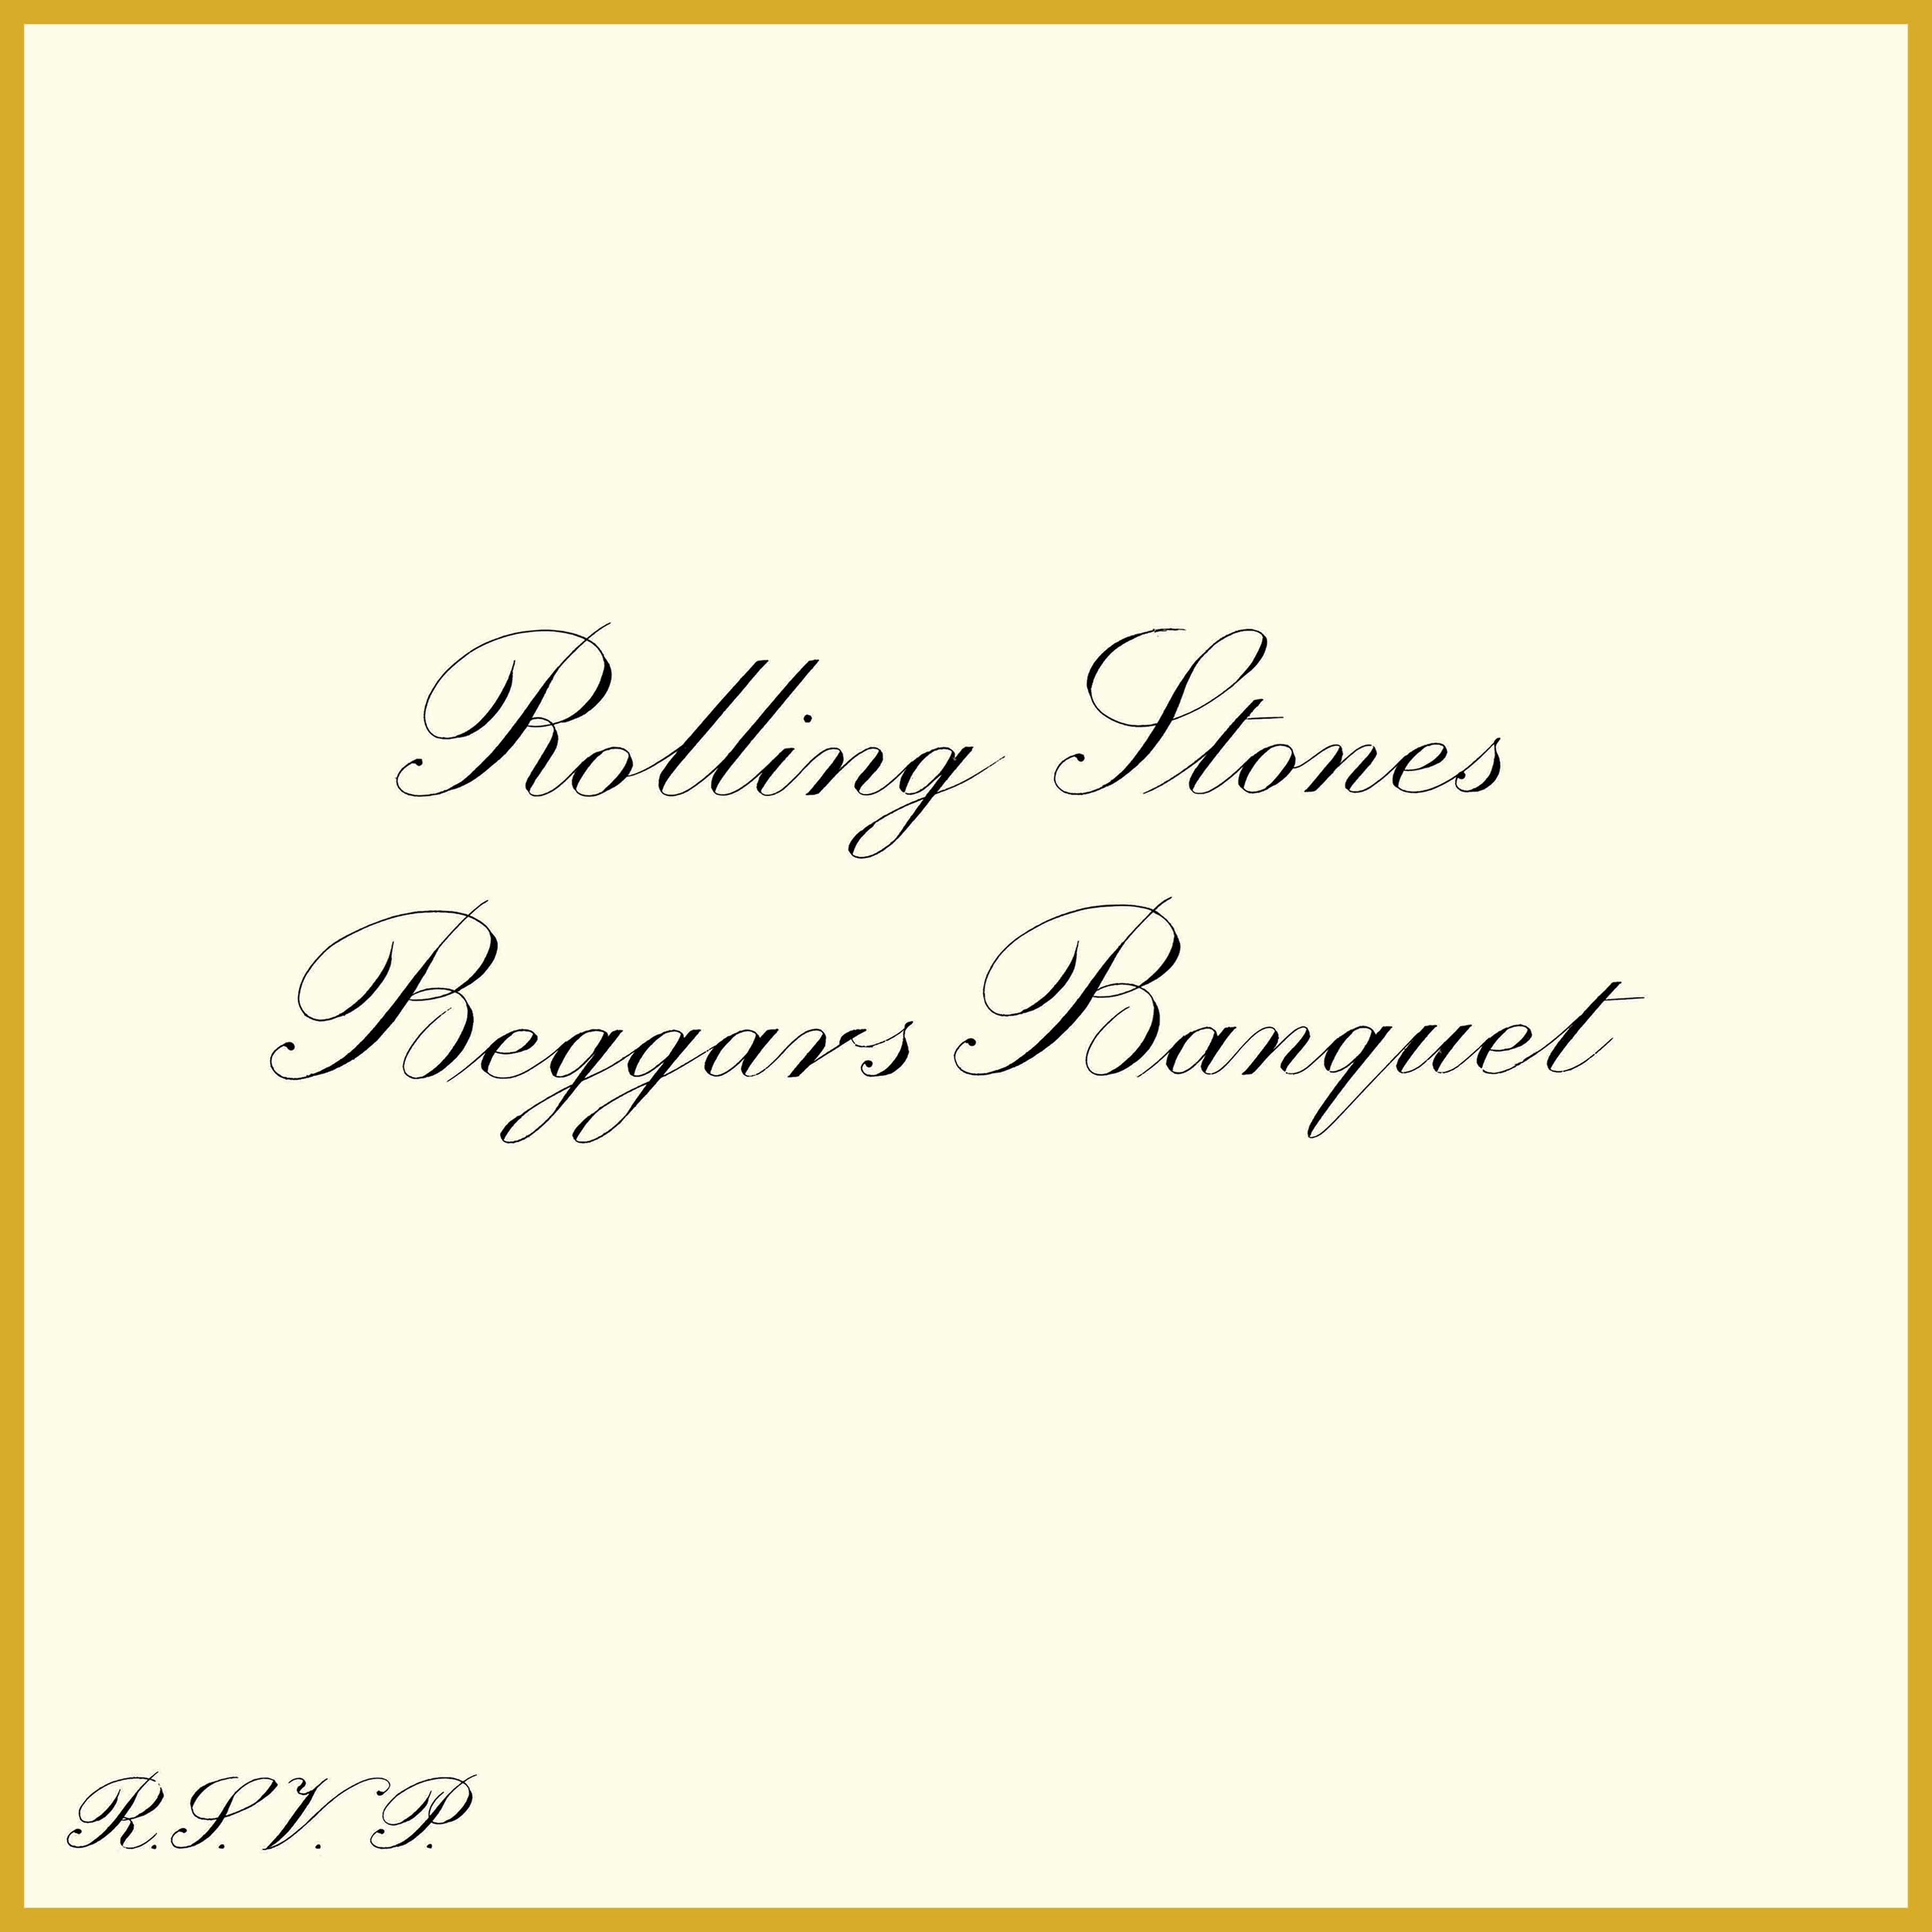 THE ROLLING STONES - BEGGARS BANQUET (50TH ANNIVERSARY) (RSVP PACKAGE) 